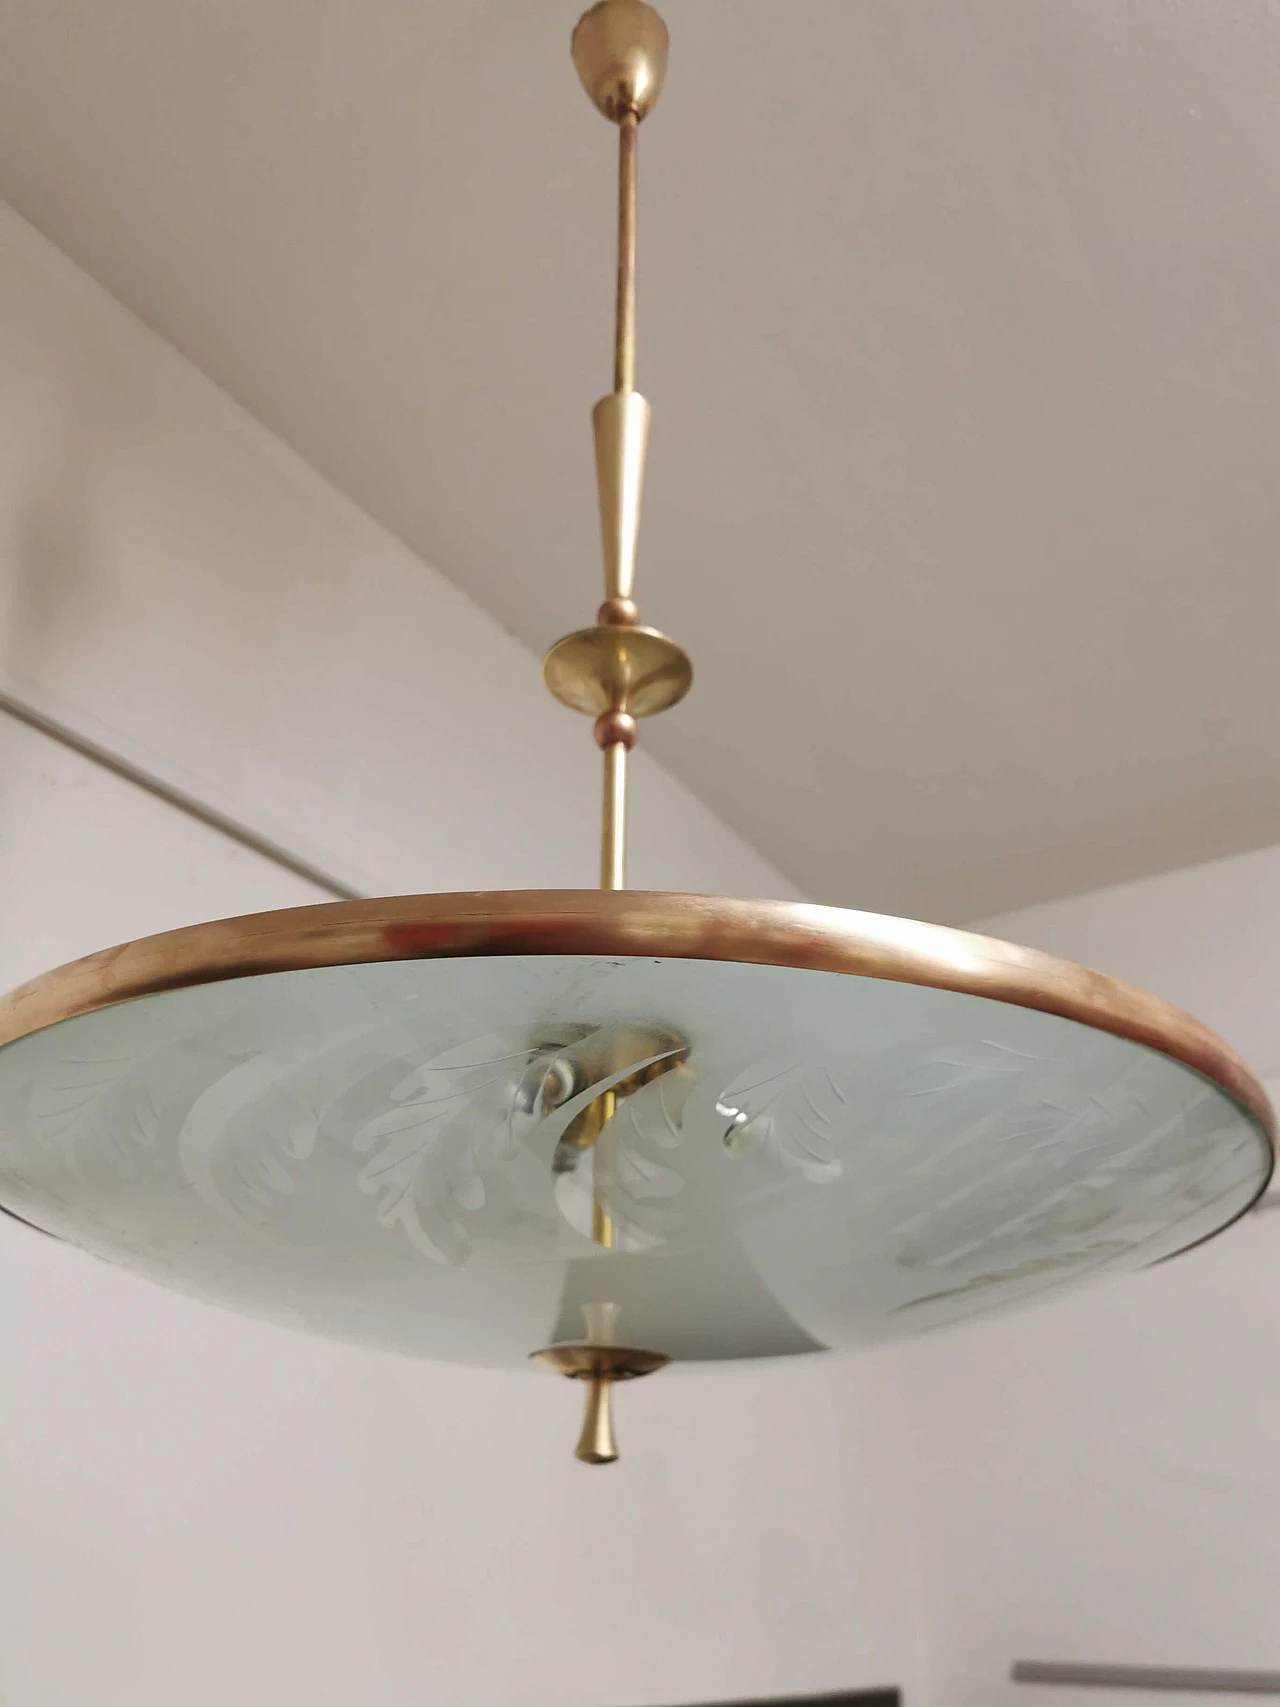 Suspension lamp by Pietro Chiesa for Fontana Arte, 1940s 1372270